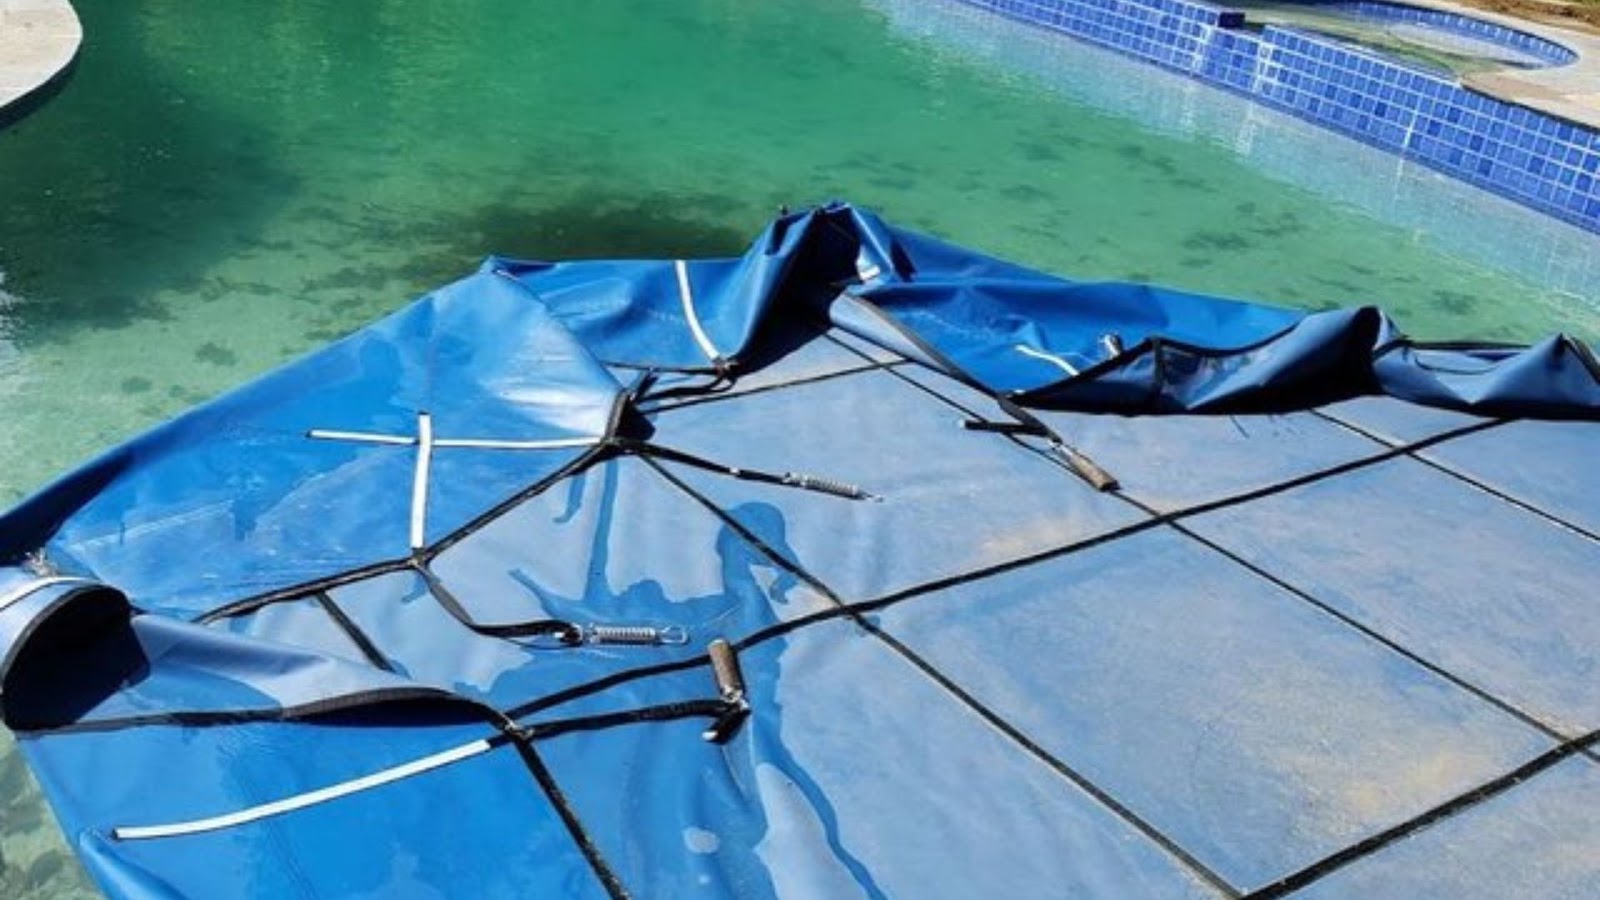 Improper Removal of the Pool Cover